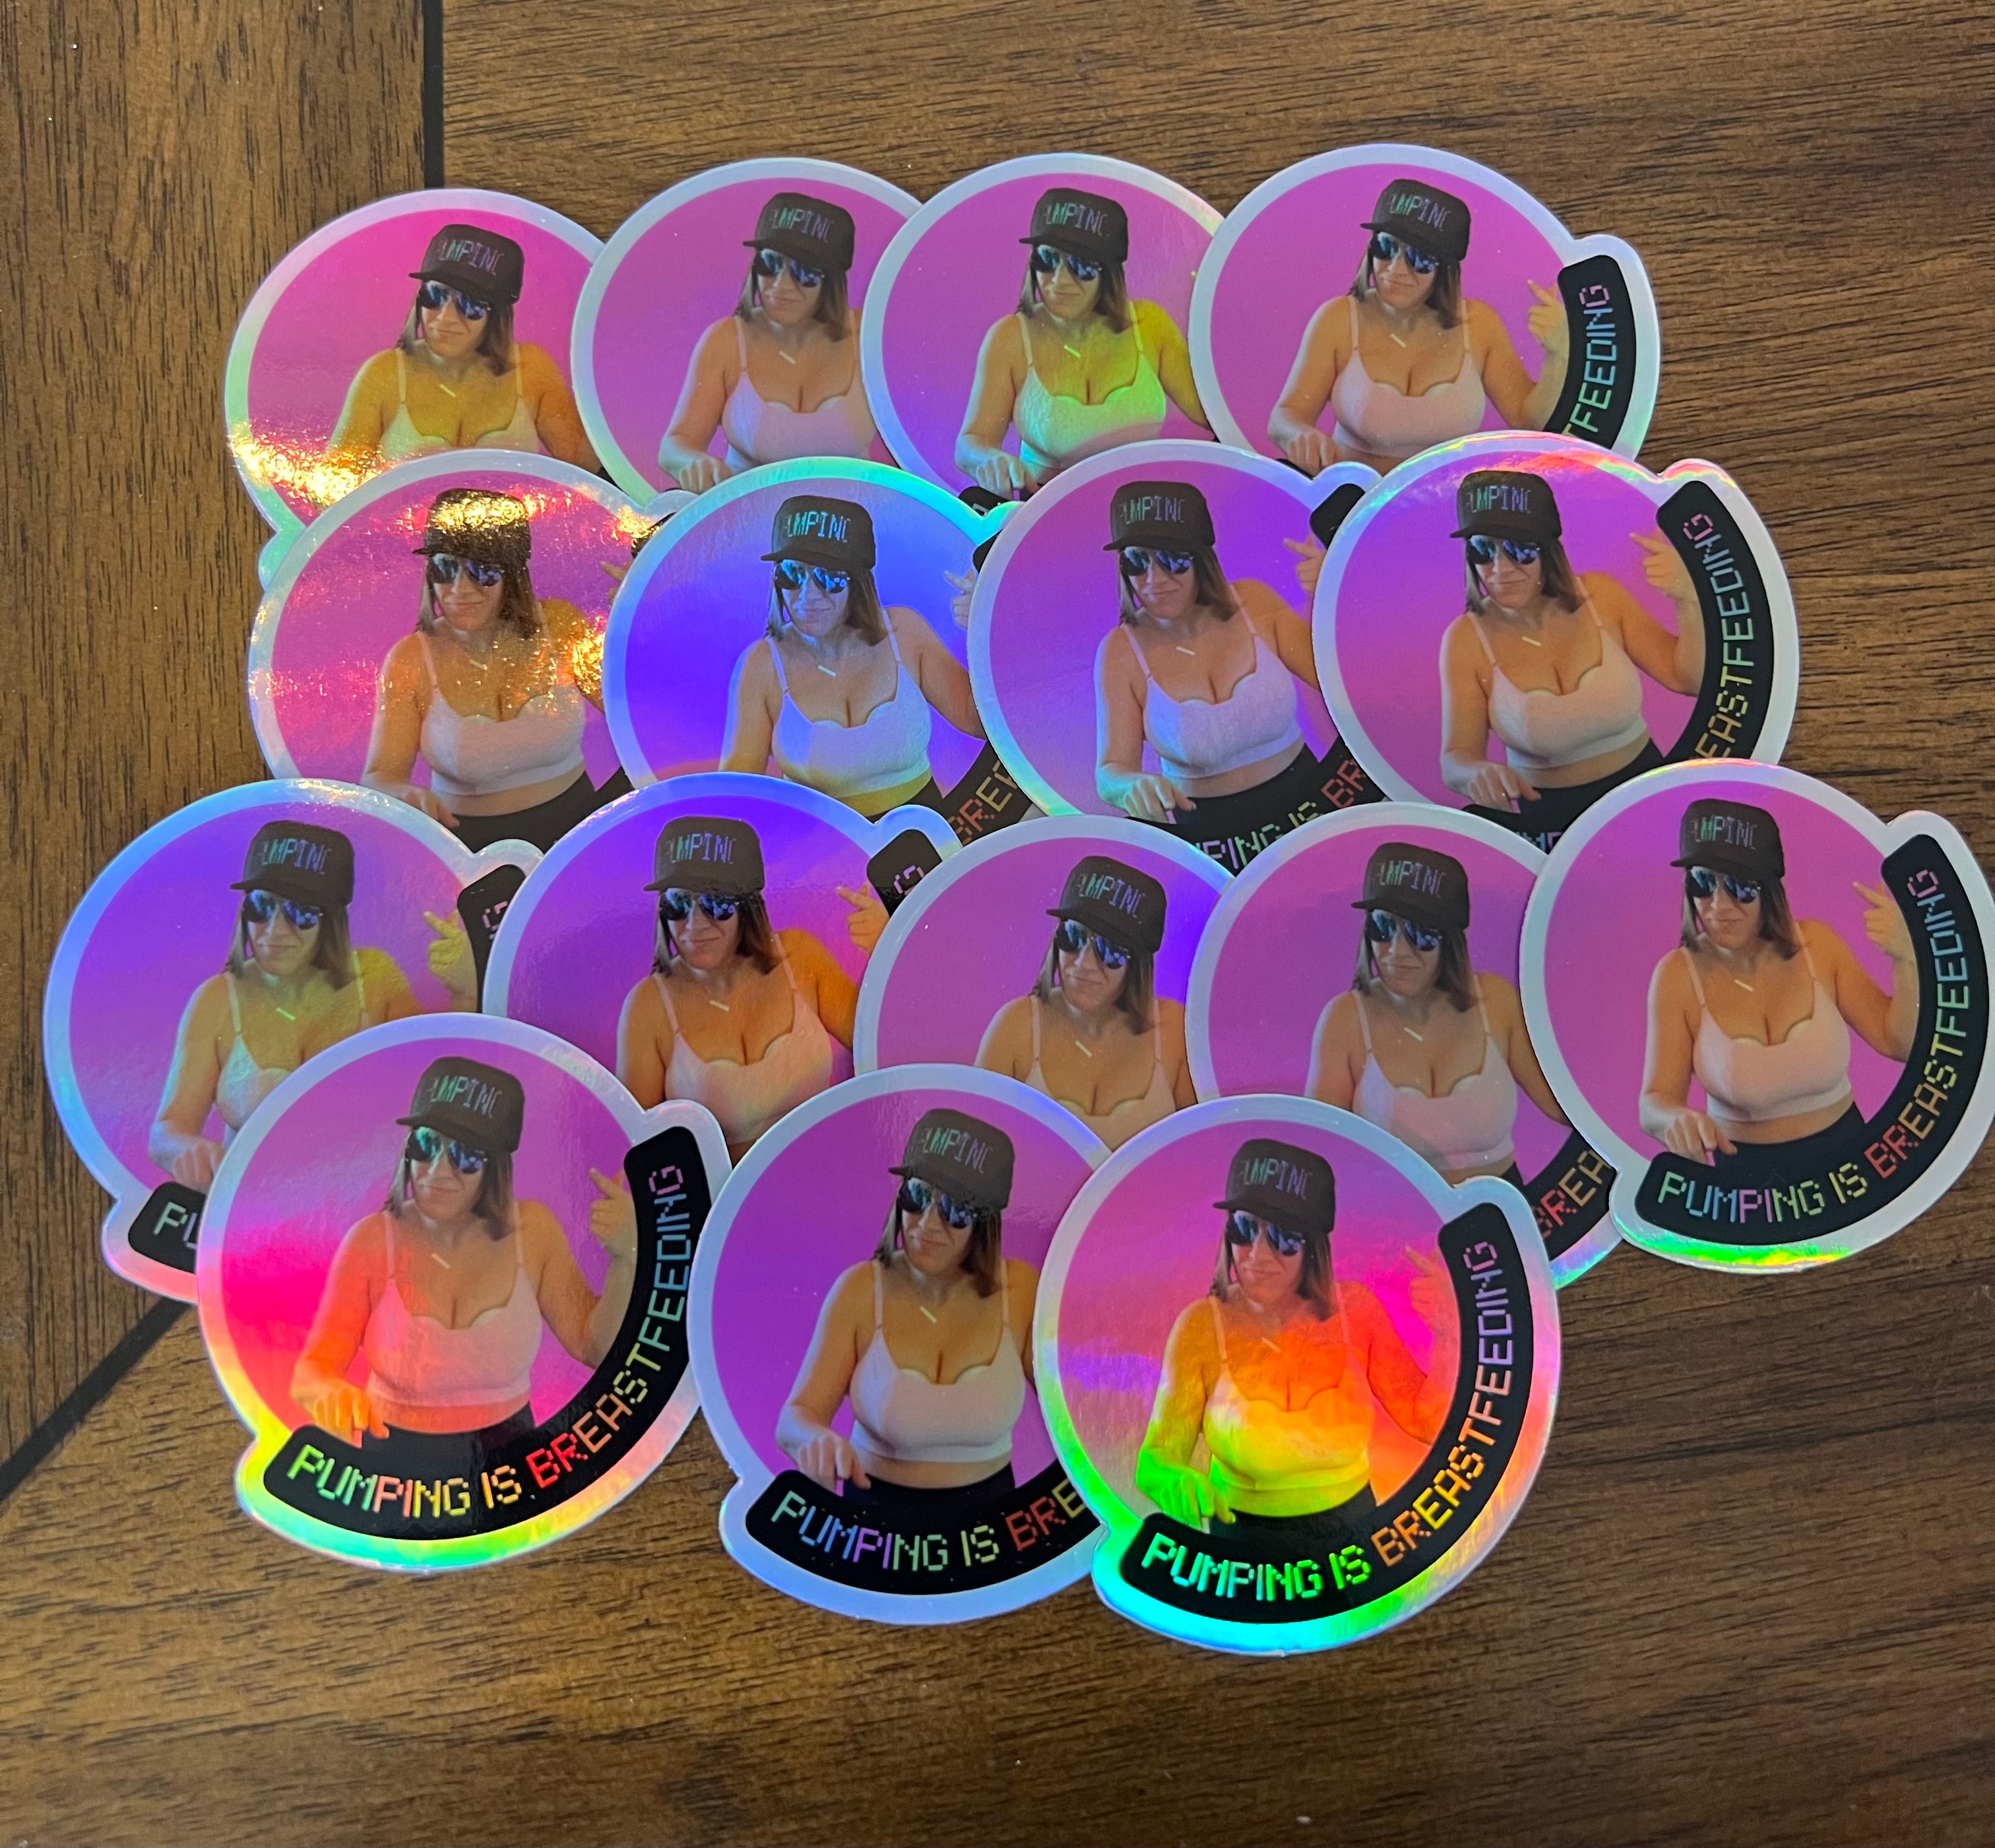 Pumping is Breastfeeding holographic sticker